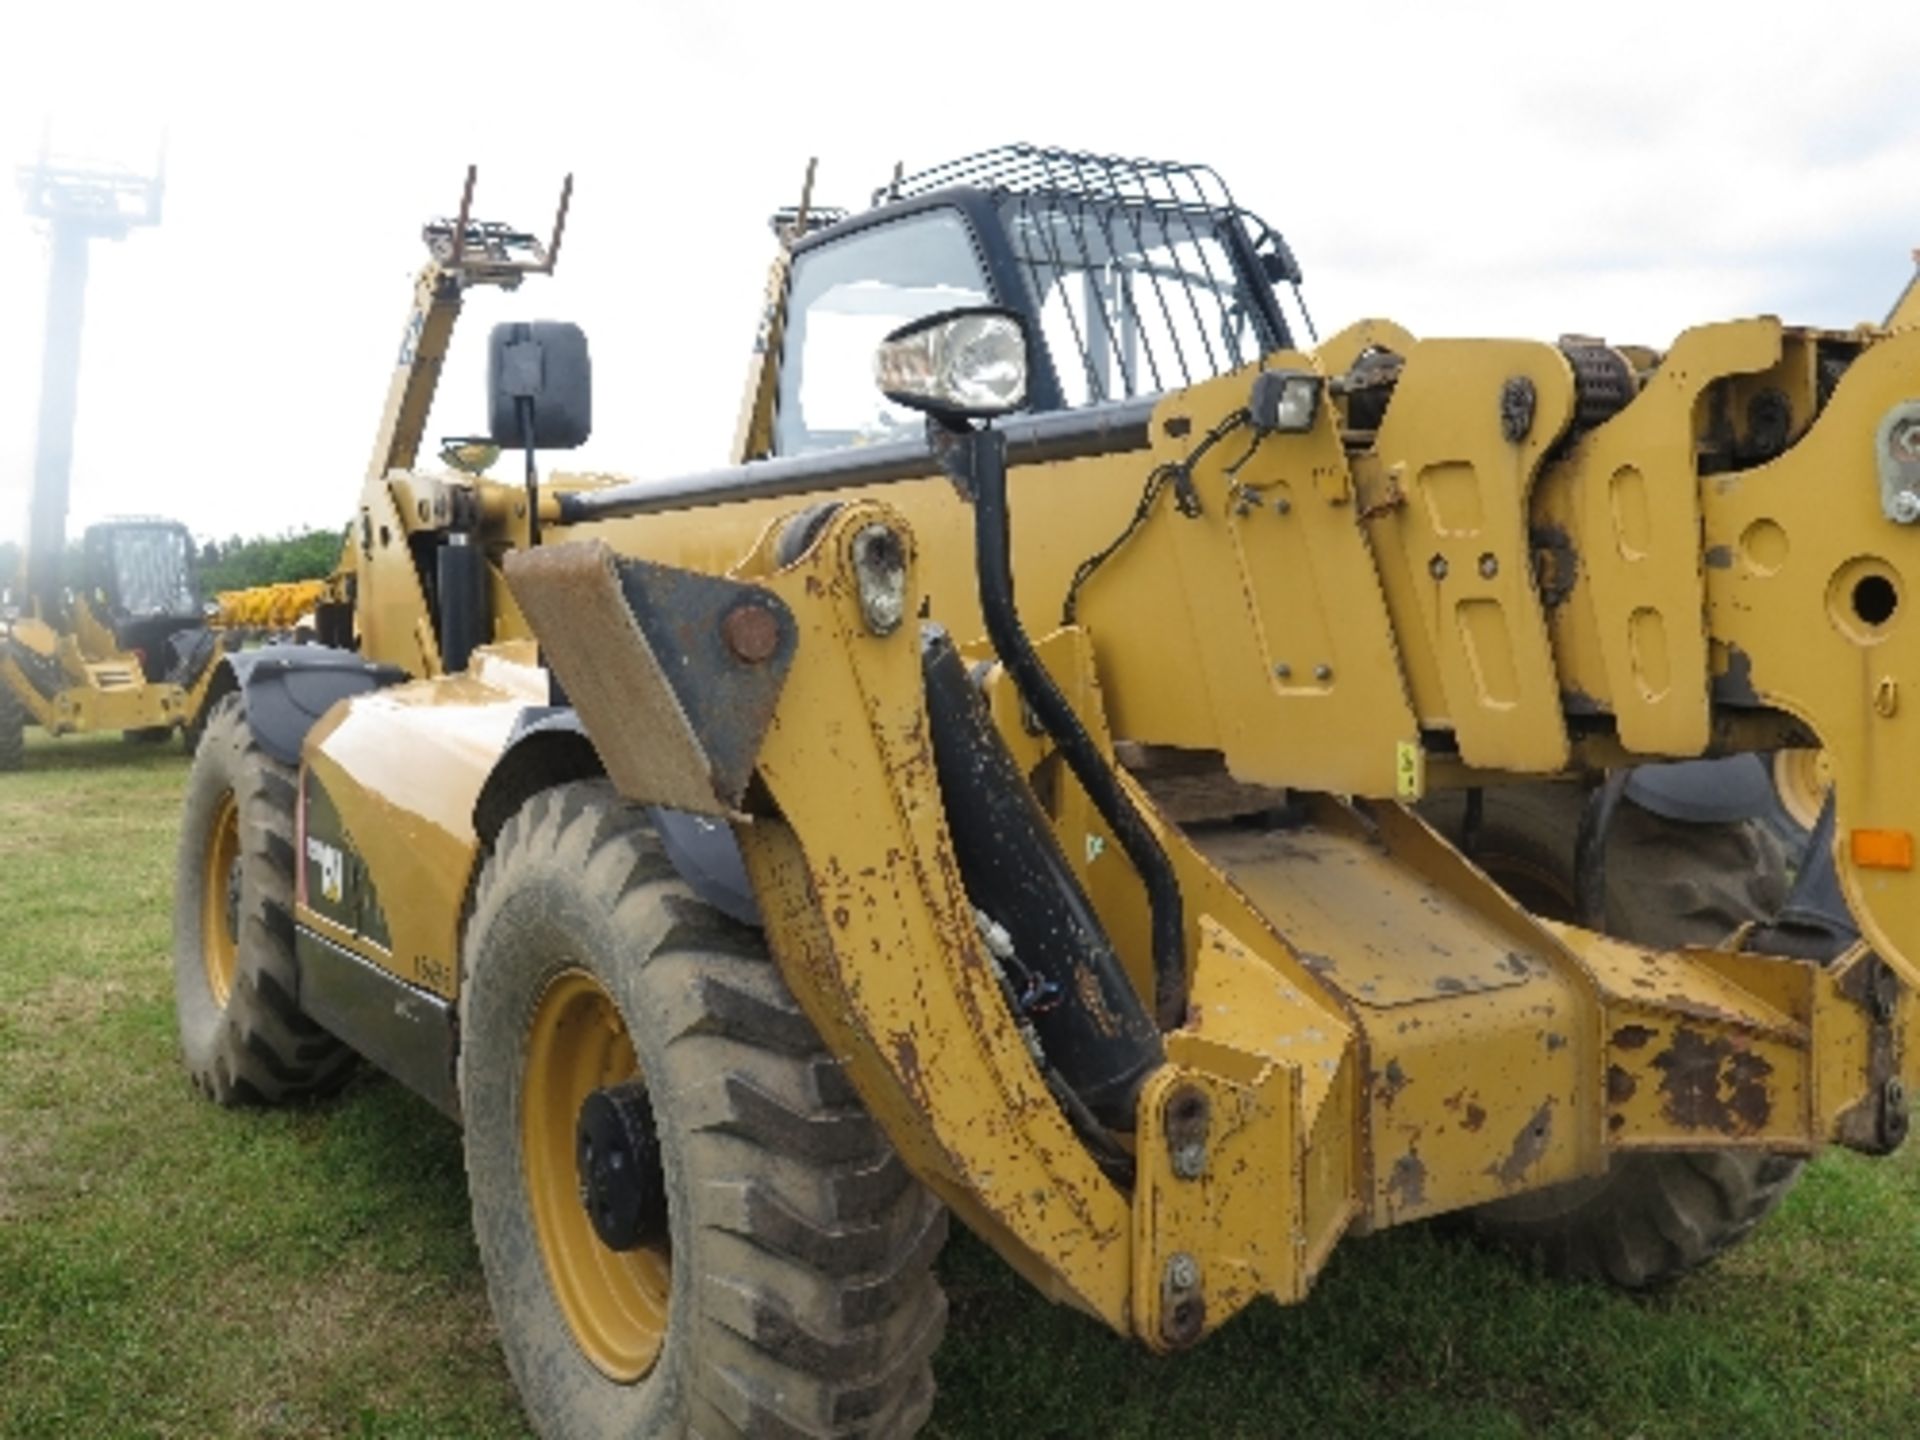 Caterpillar TH580B telehandler 2007 154395
NON RUNNER
ECM ISSUE
ALL LOTS are SOLD AS SEEN WITHOUT - Image 2 of 7